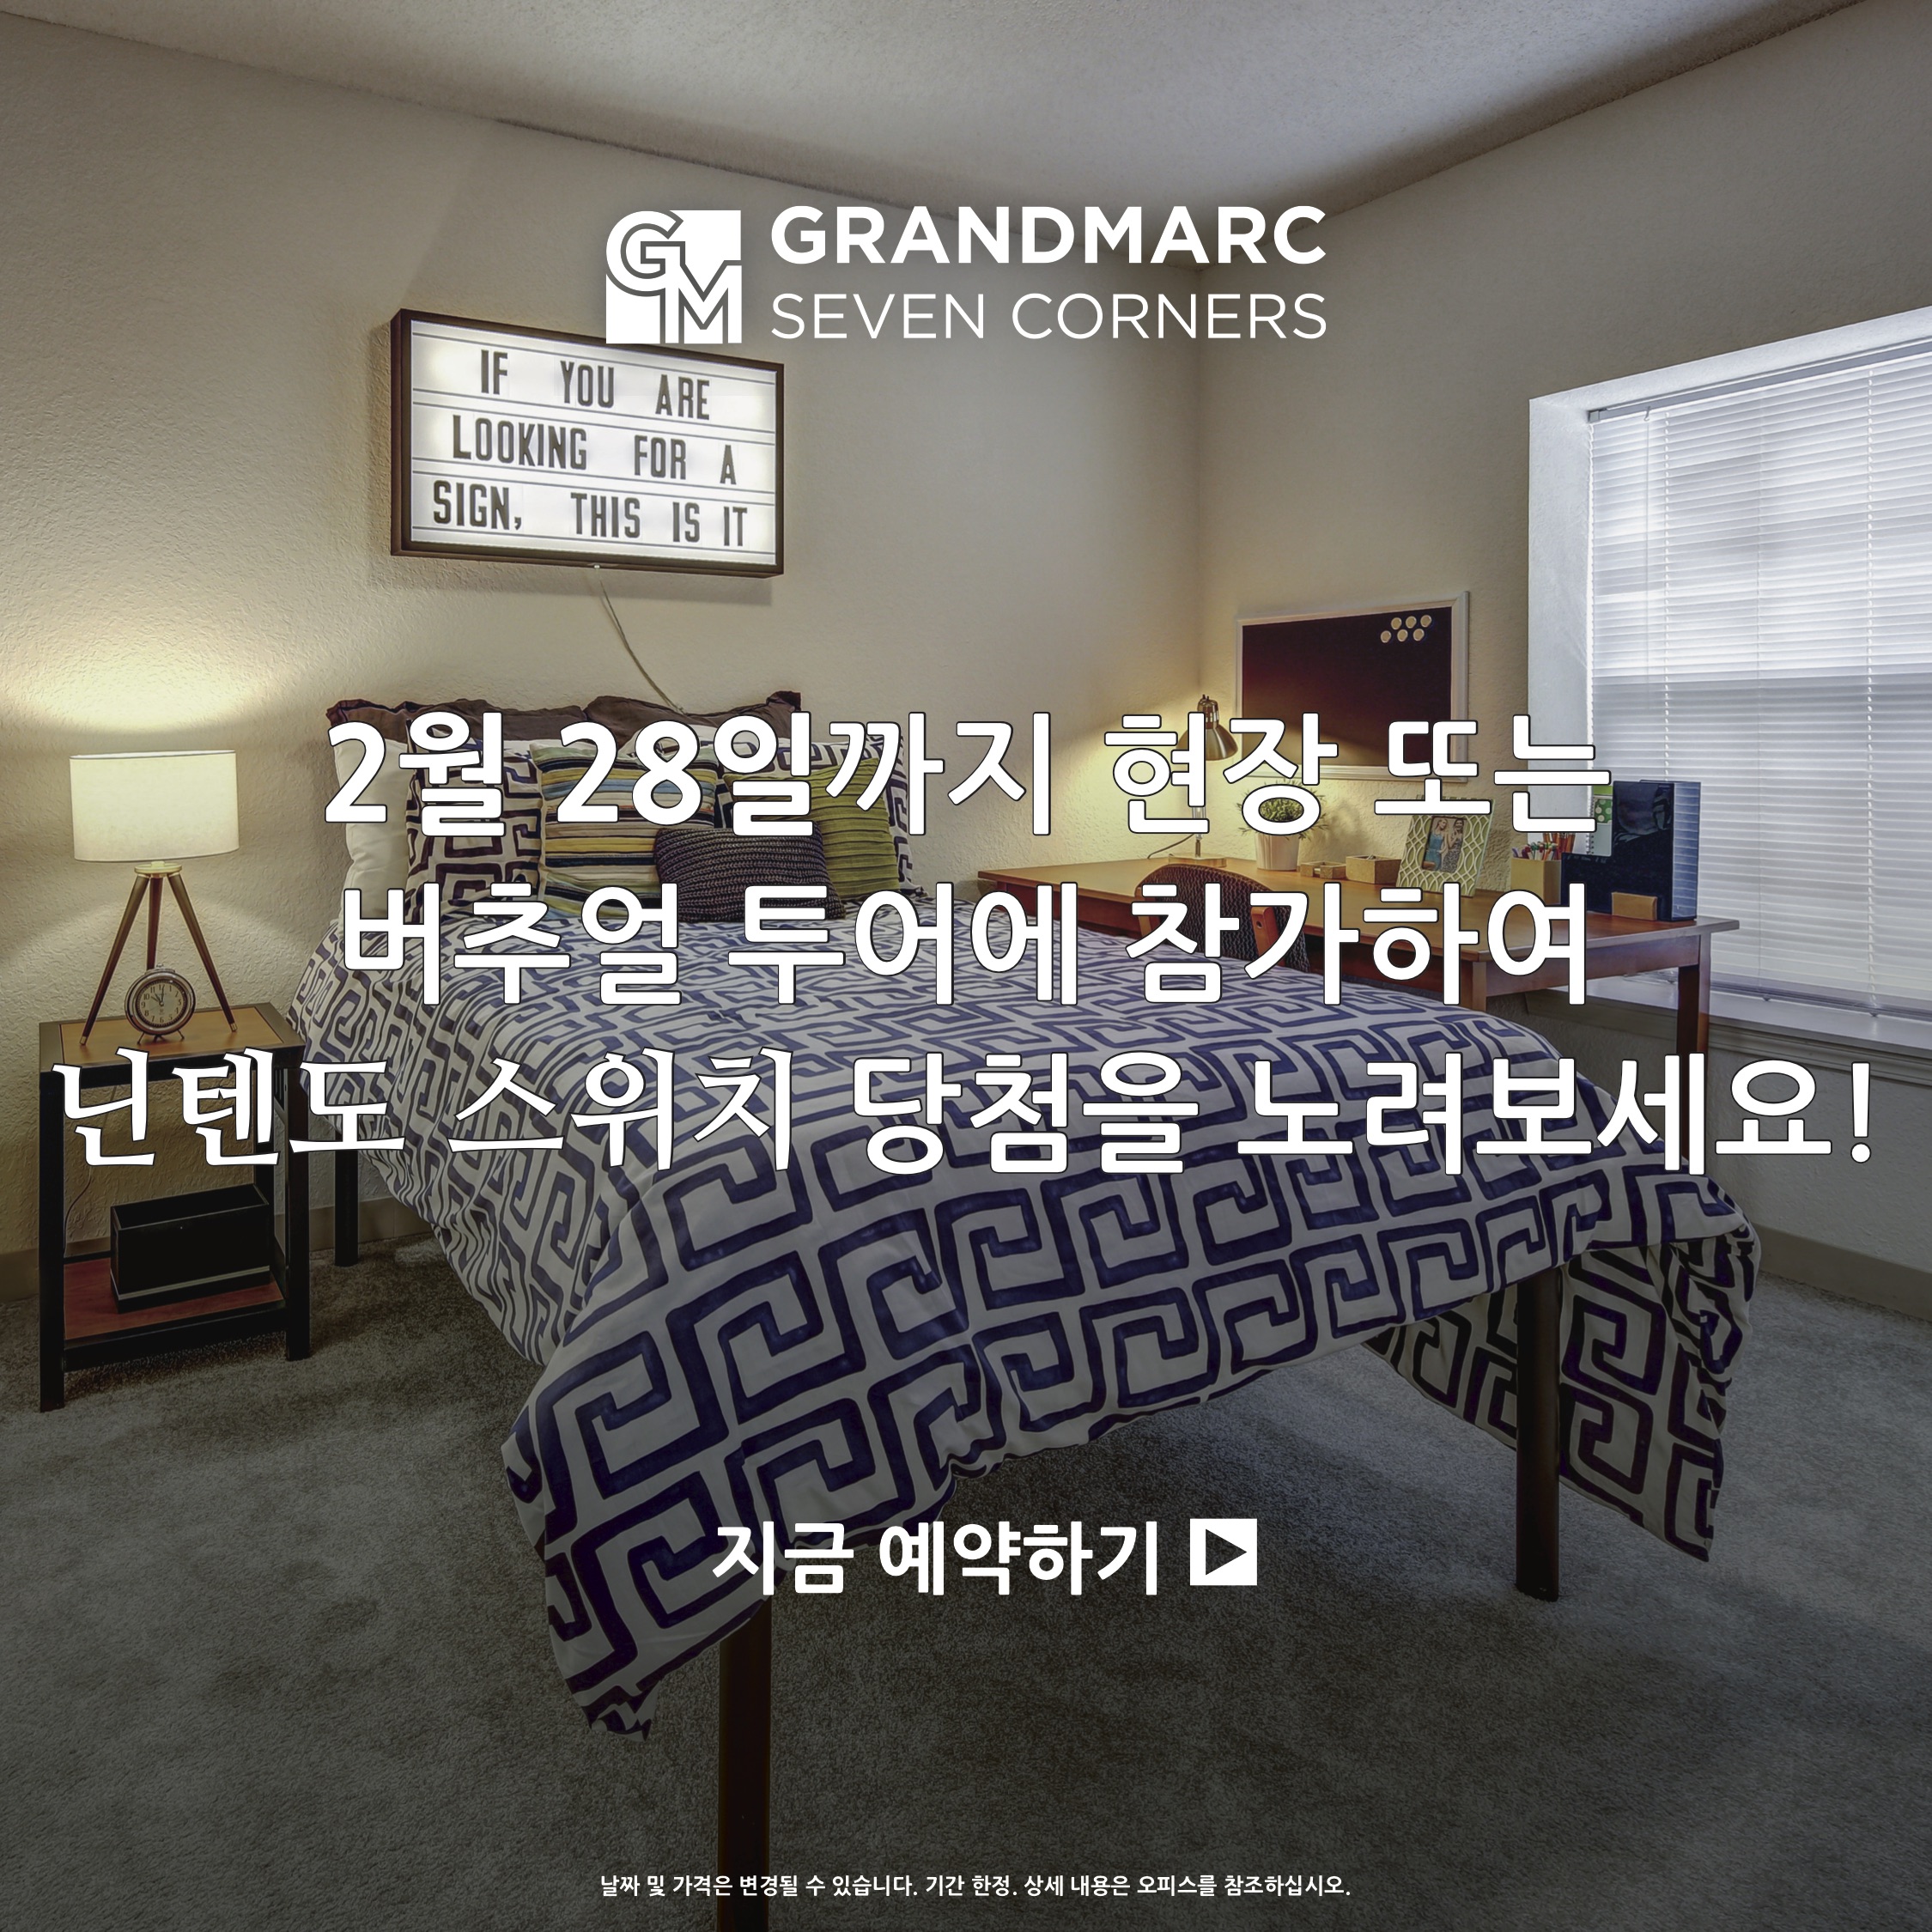 live KOR 310 TAT Switch Ad 1080x1080 OUTLINED 2.04.21.jpg